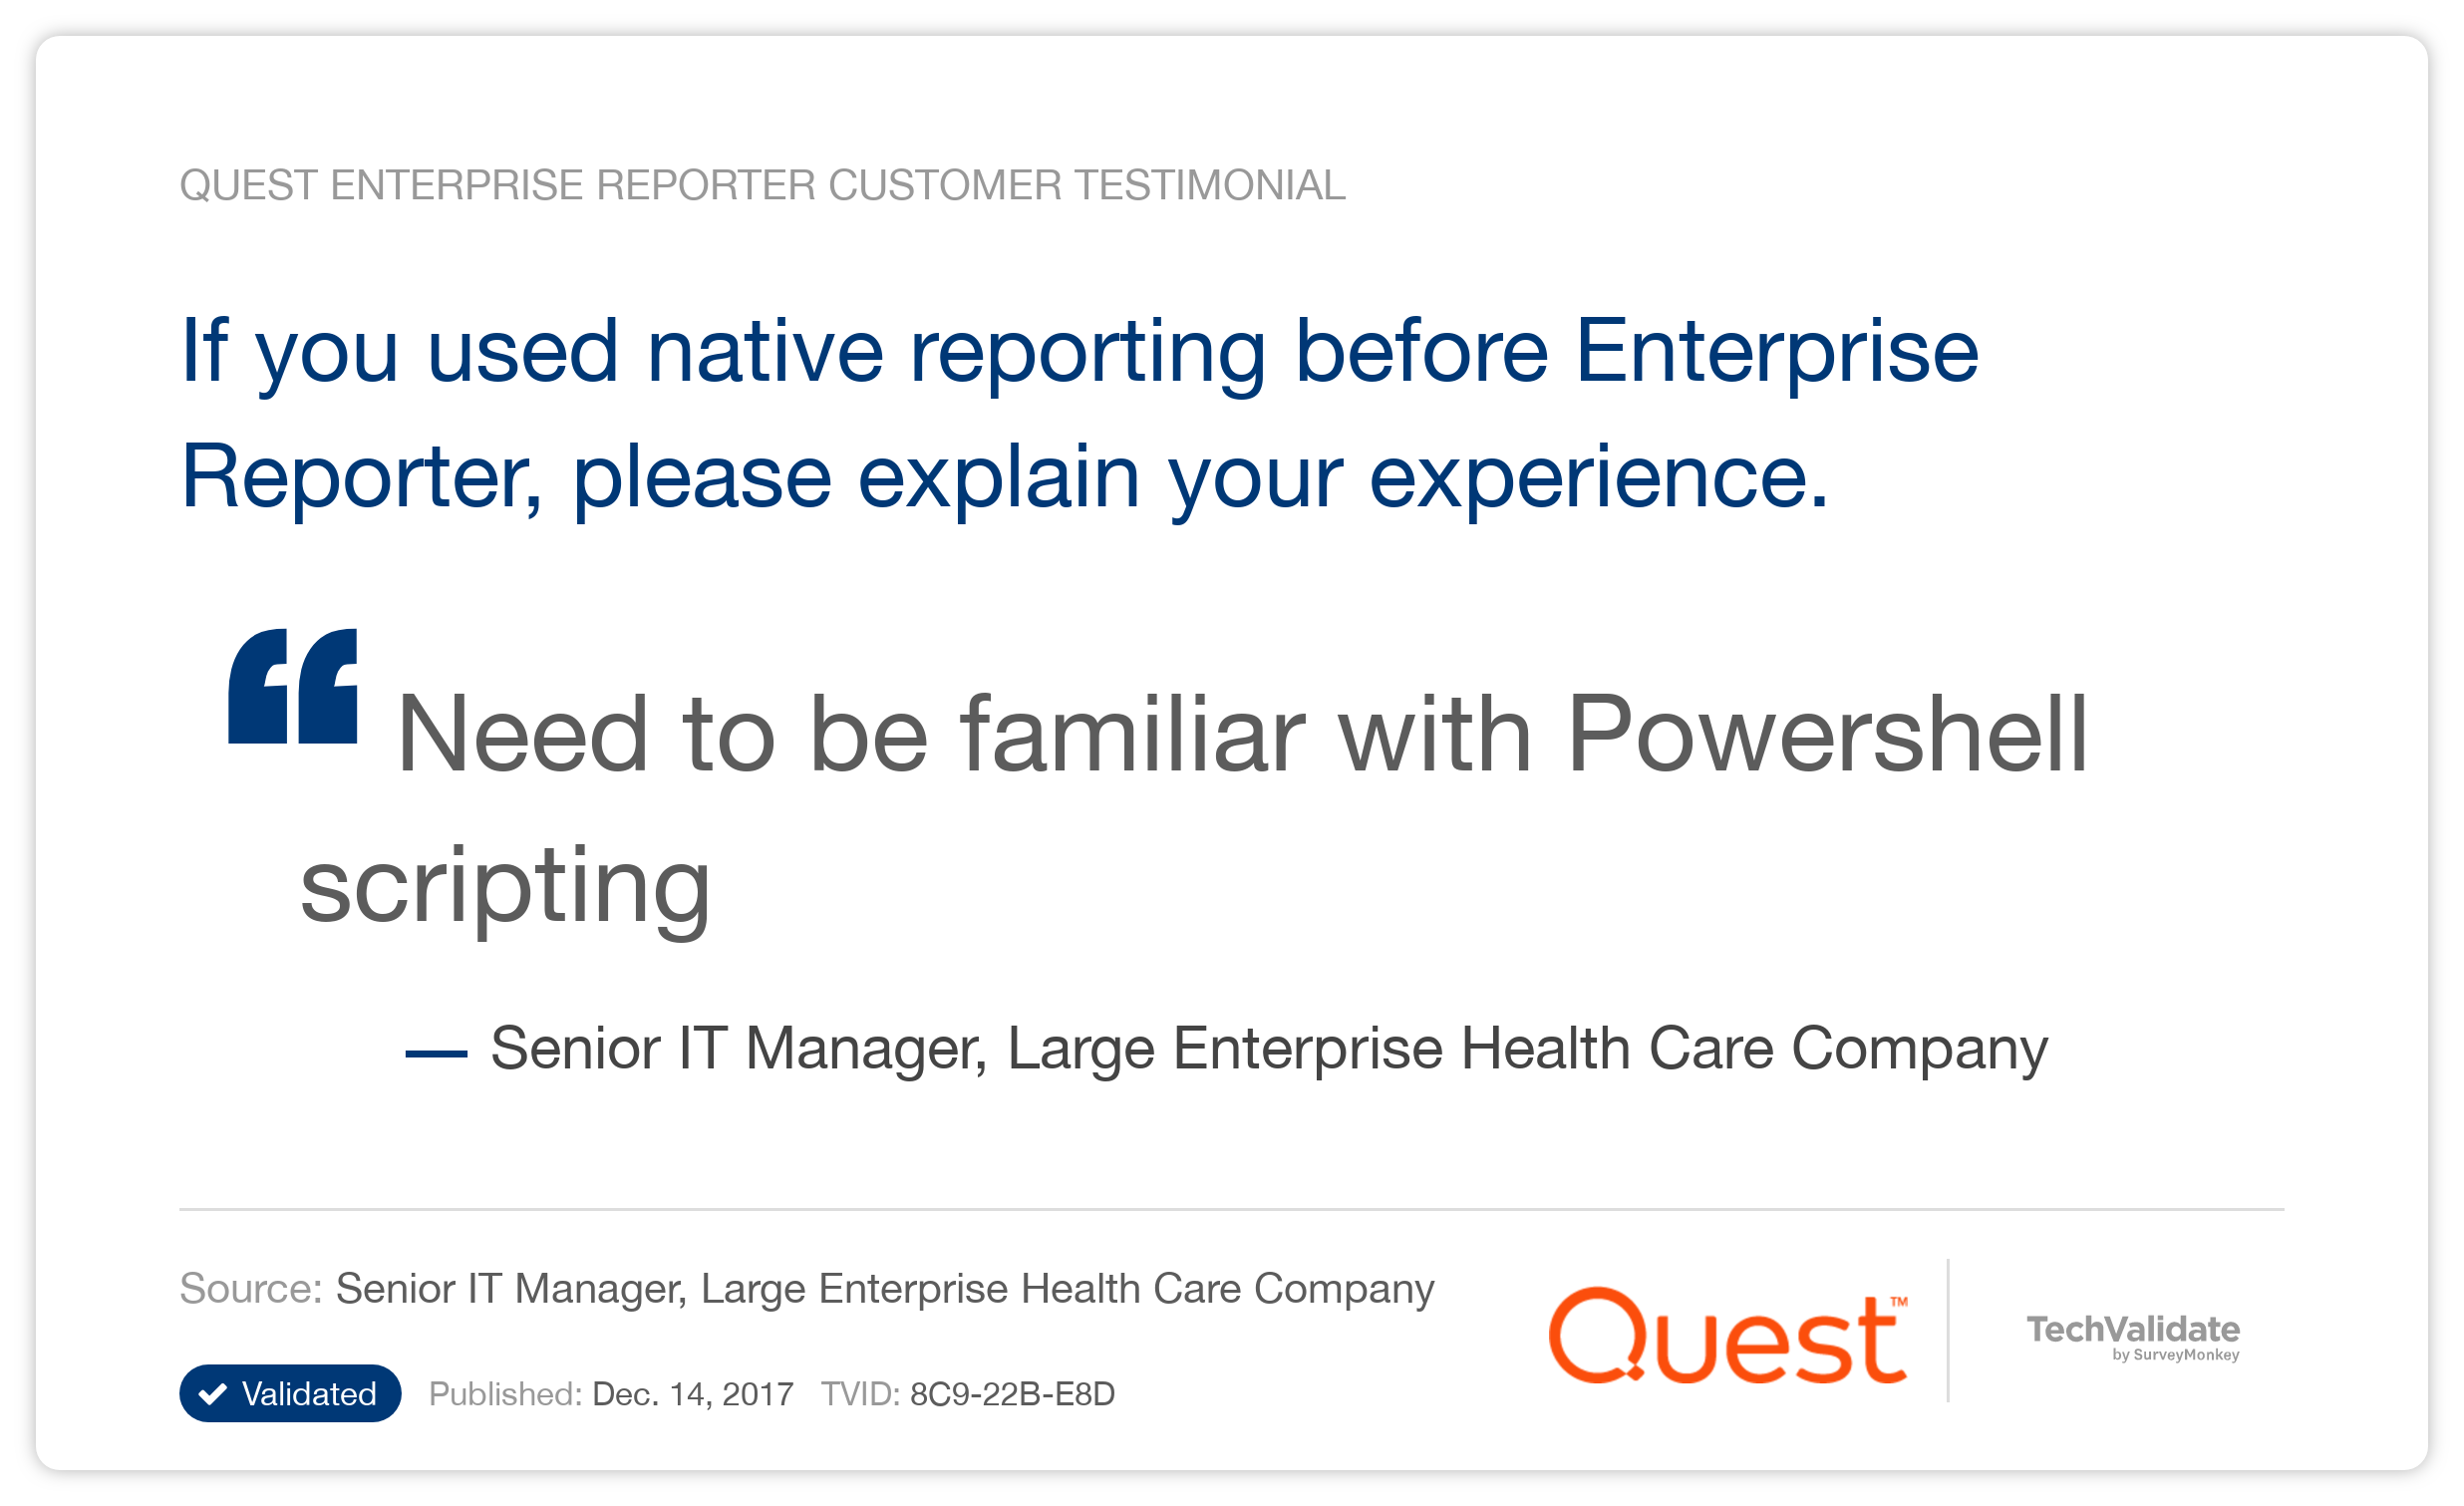 If you used native reporting before Enterprise Reporter, please explain your experience.